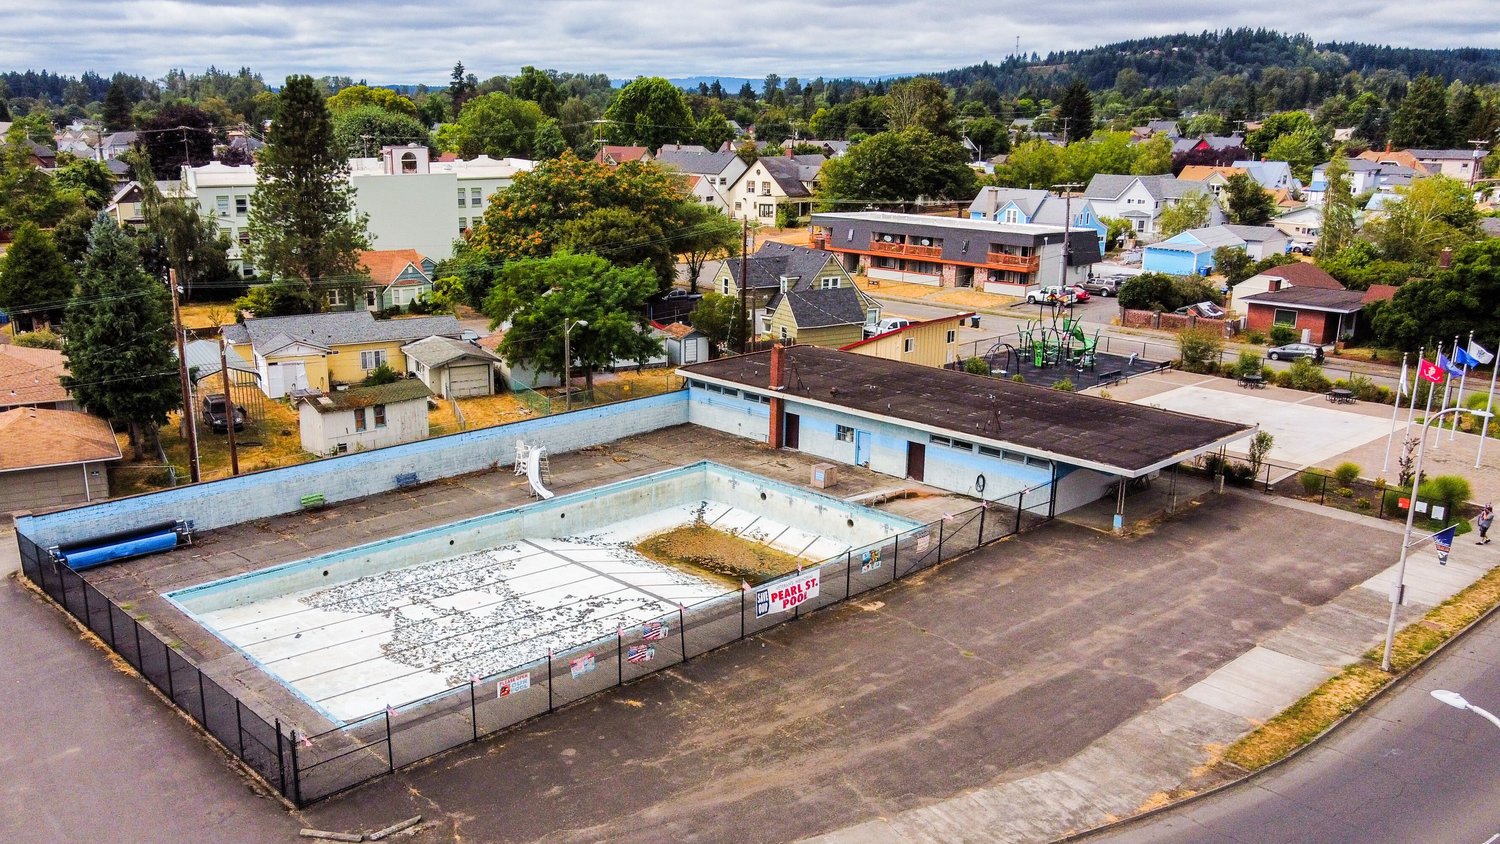 The Pearl Street Pool is pictured from above in this photograph taken in Centralia.